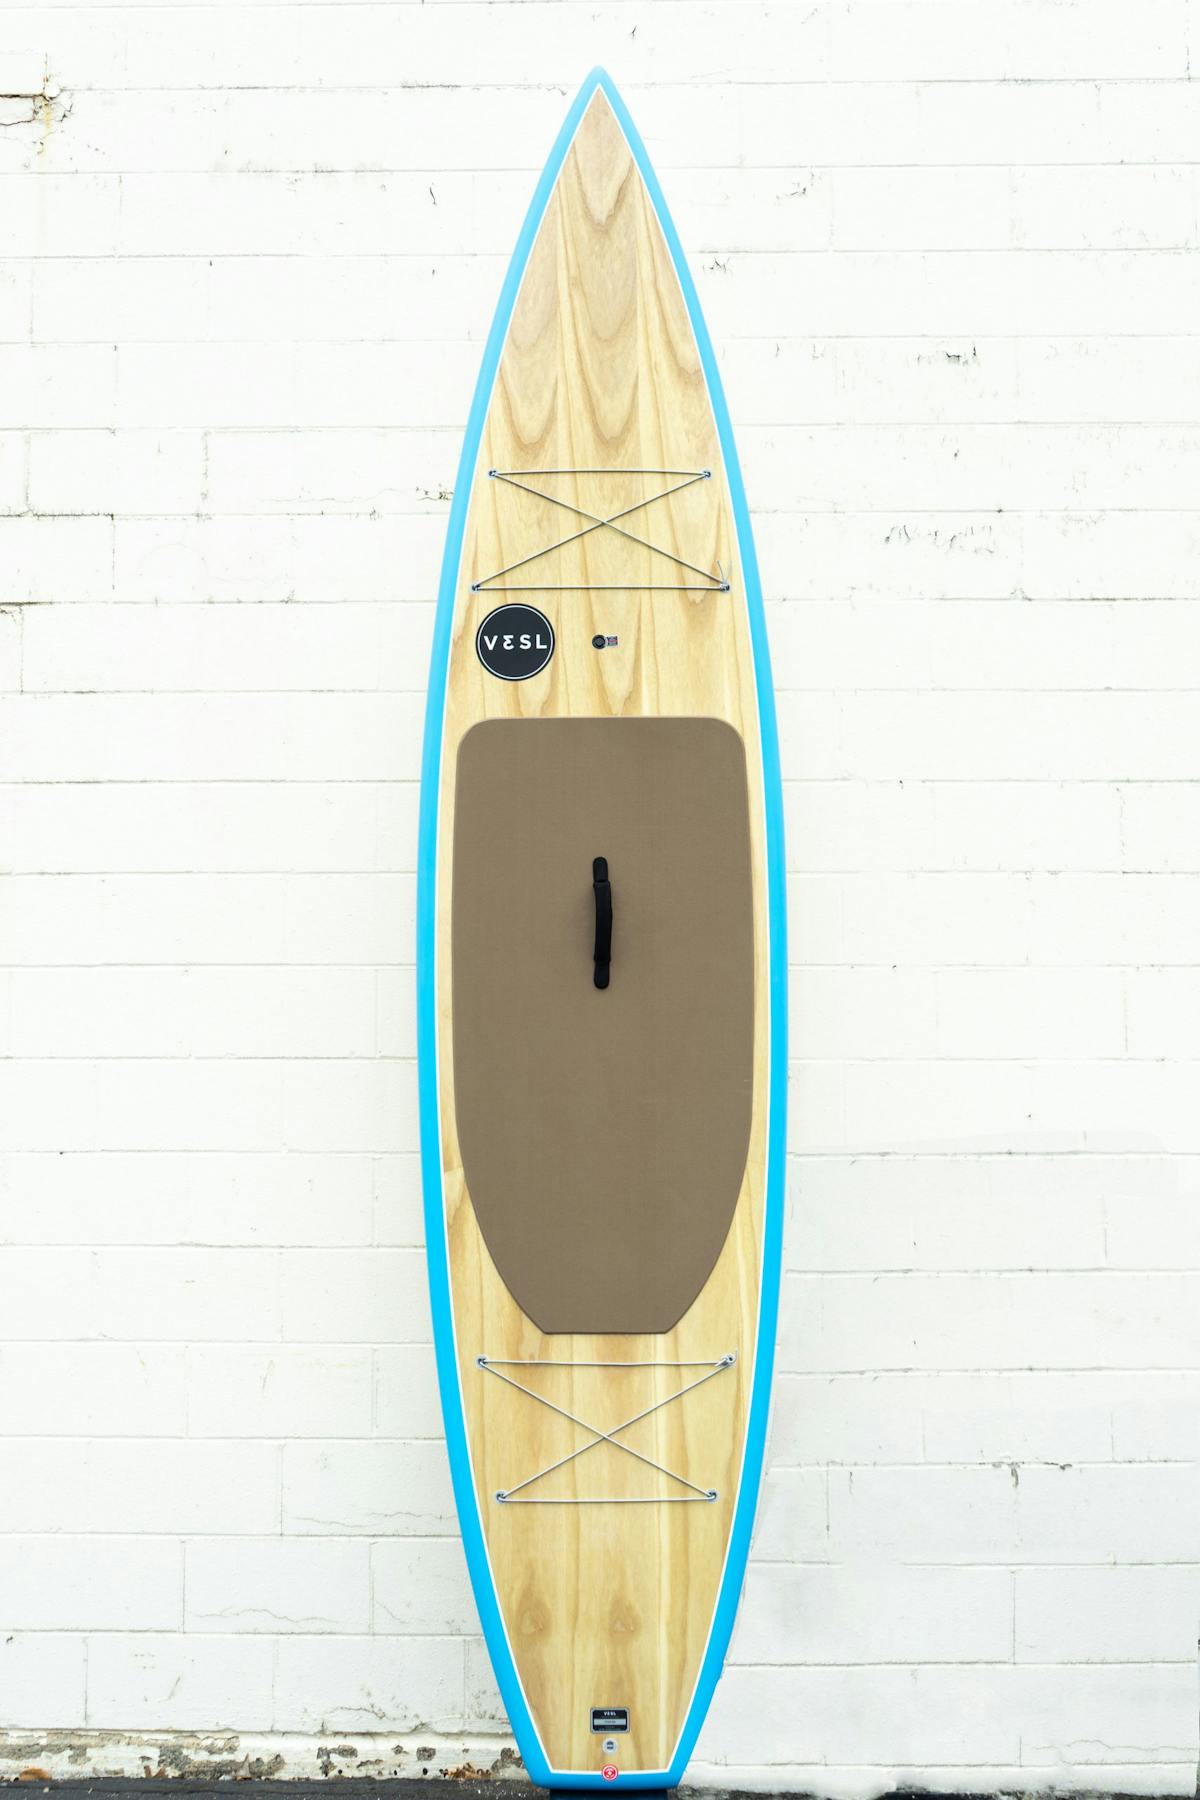 12' blue wood touring paddle board